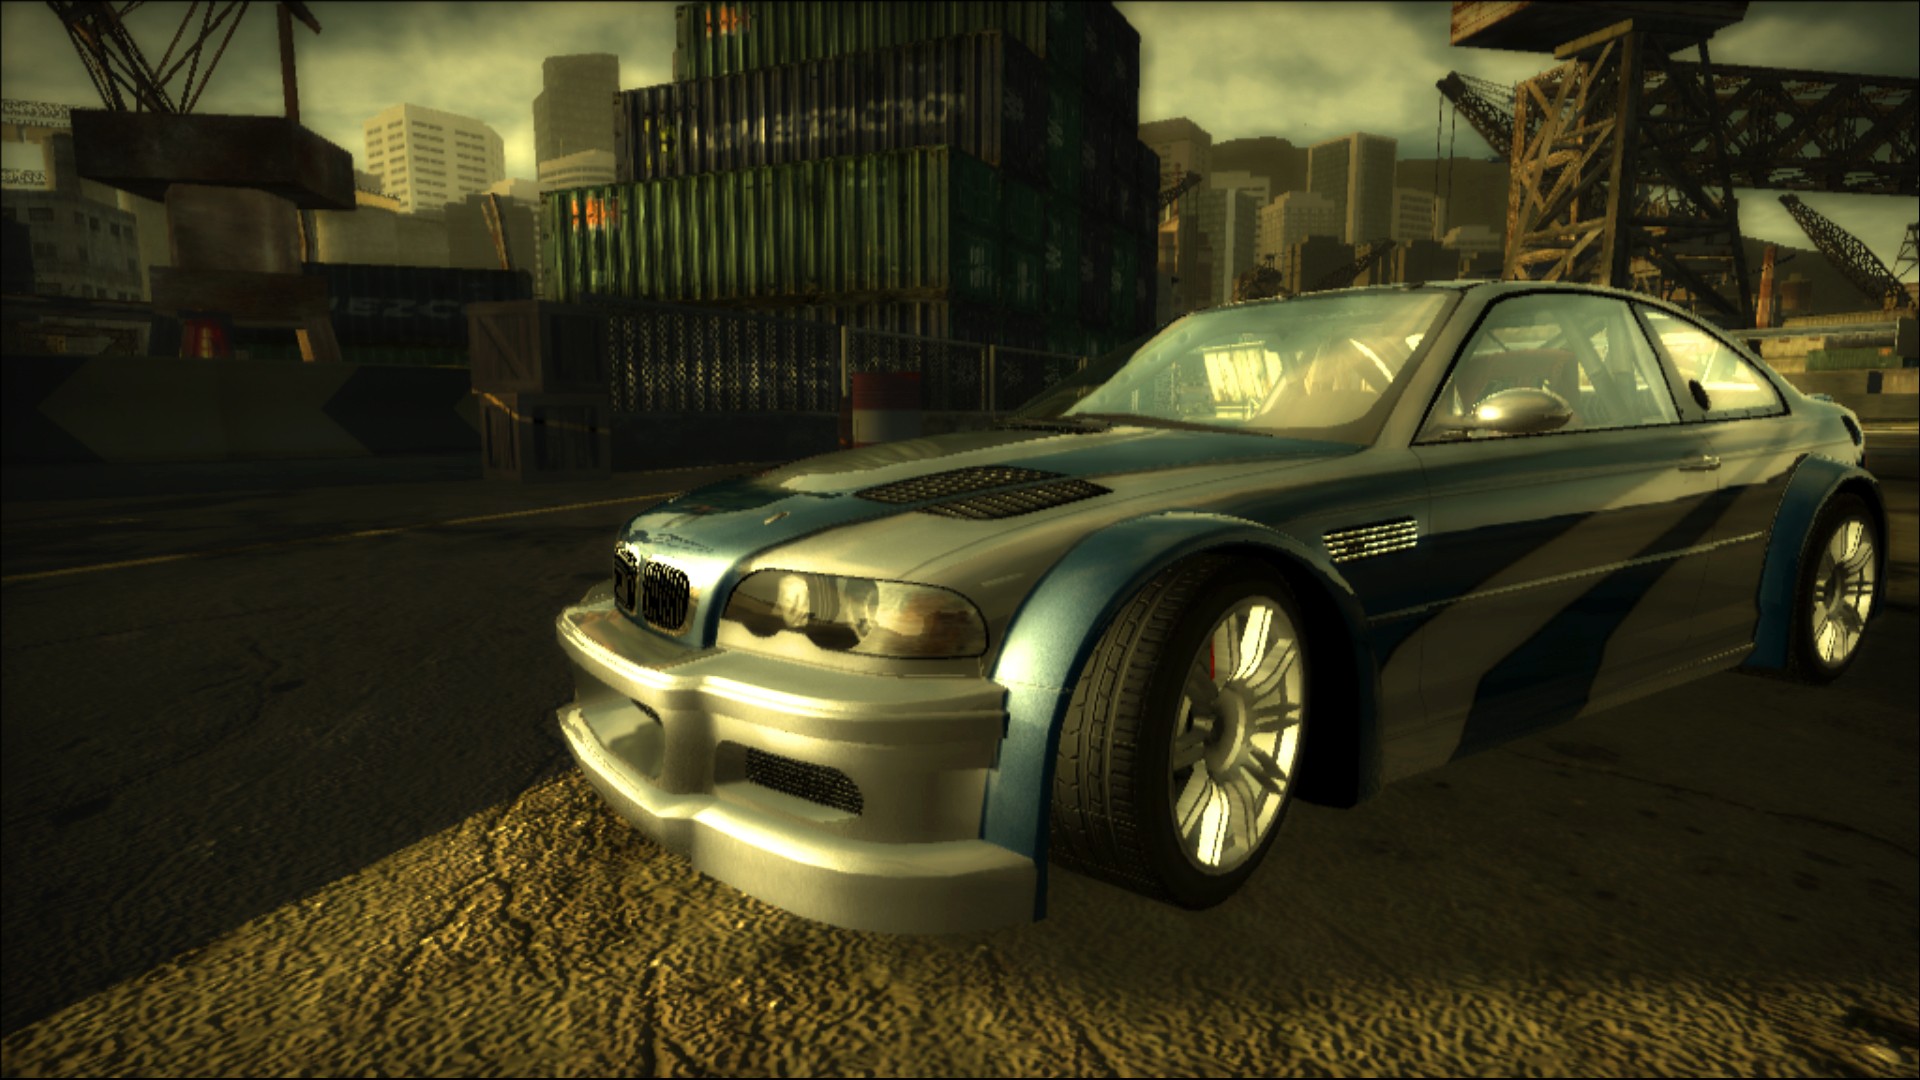 Most wanted shop. Игра NFS most wanted 2005. BMW m3 GTR. NFS most wanted 2005 мост. Need for Speed mostwanted 2005.